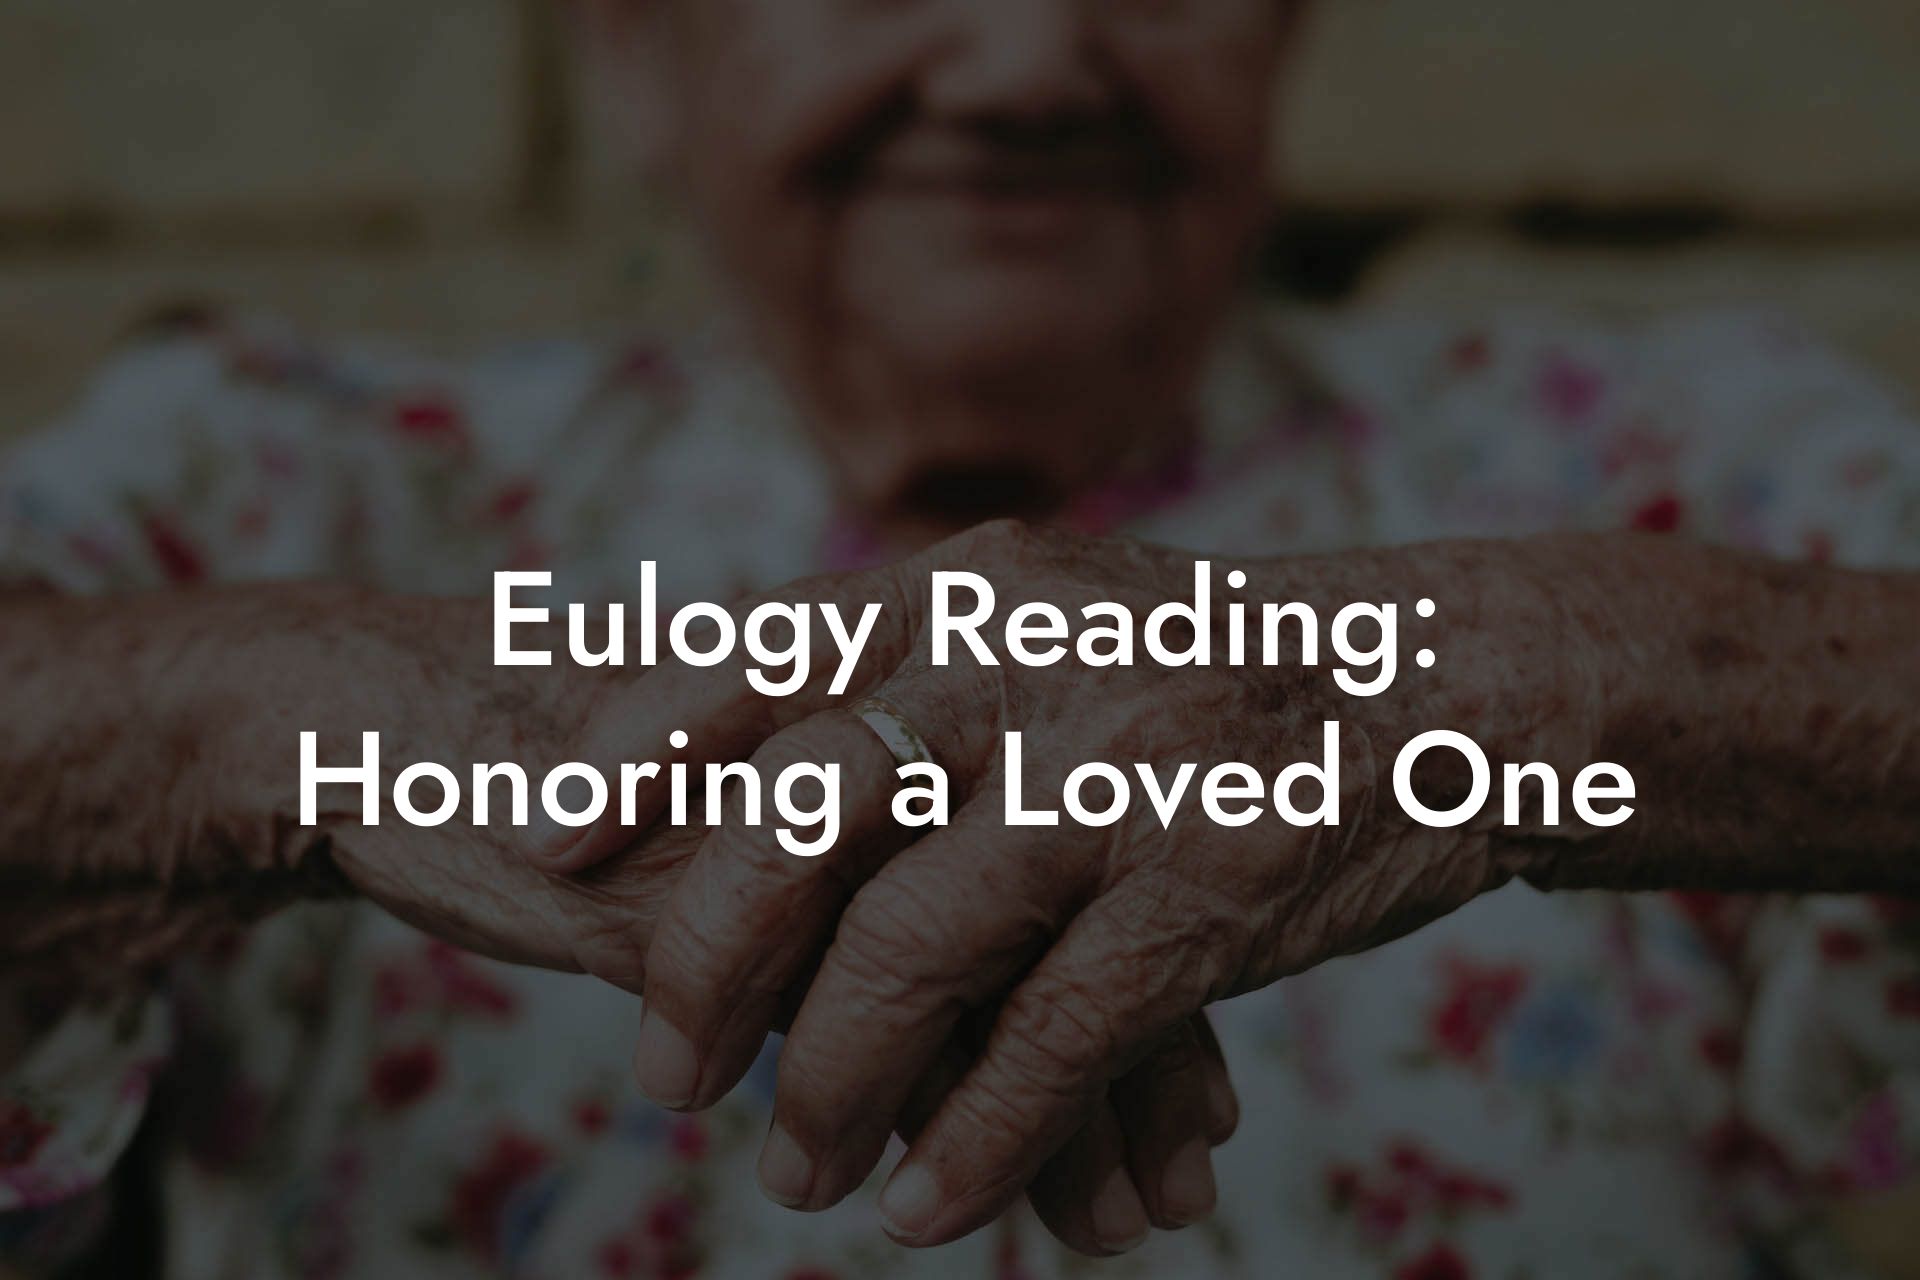 Eulogy Reading: Honoring a Loved One